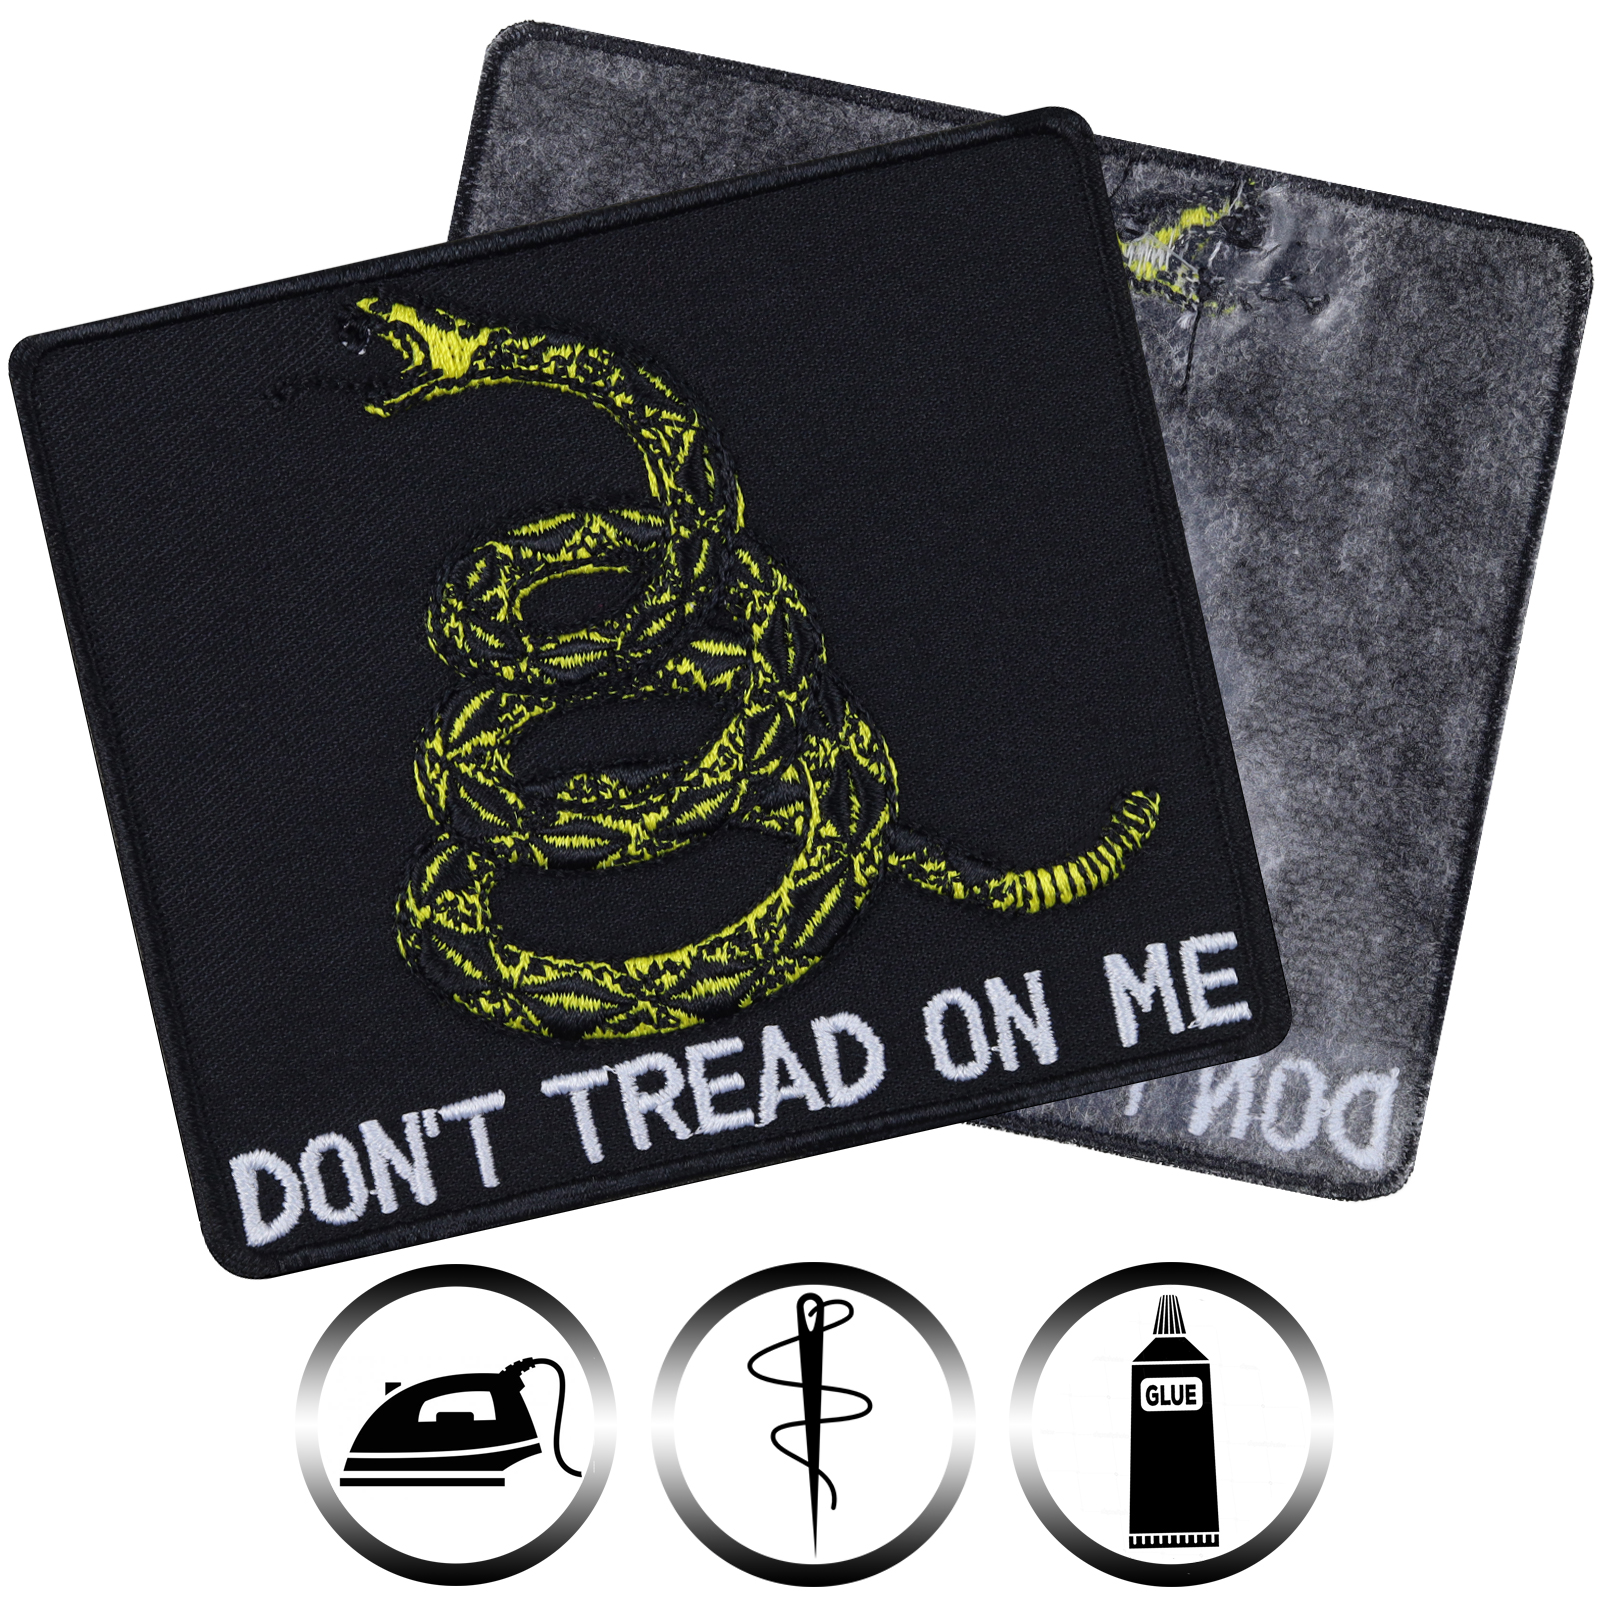 Don't tread on me - Patch